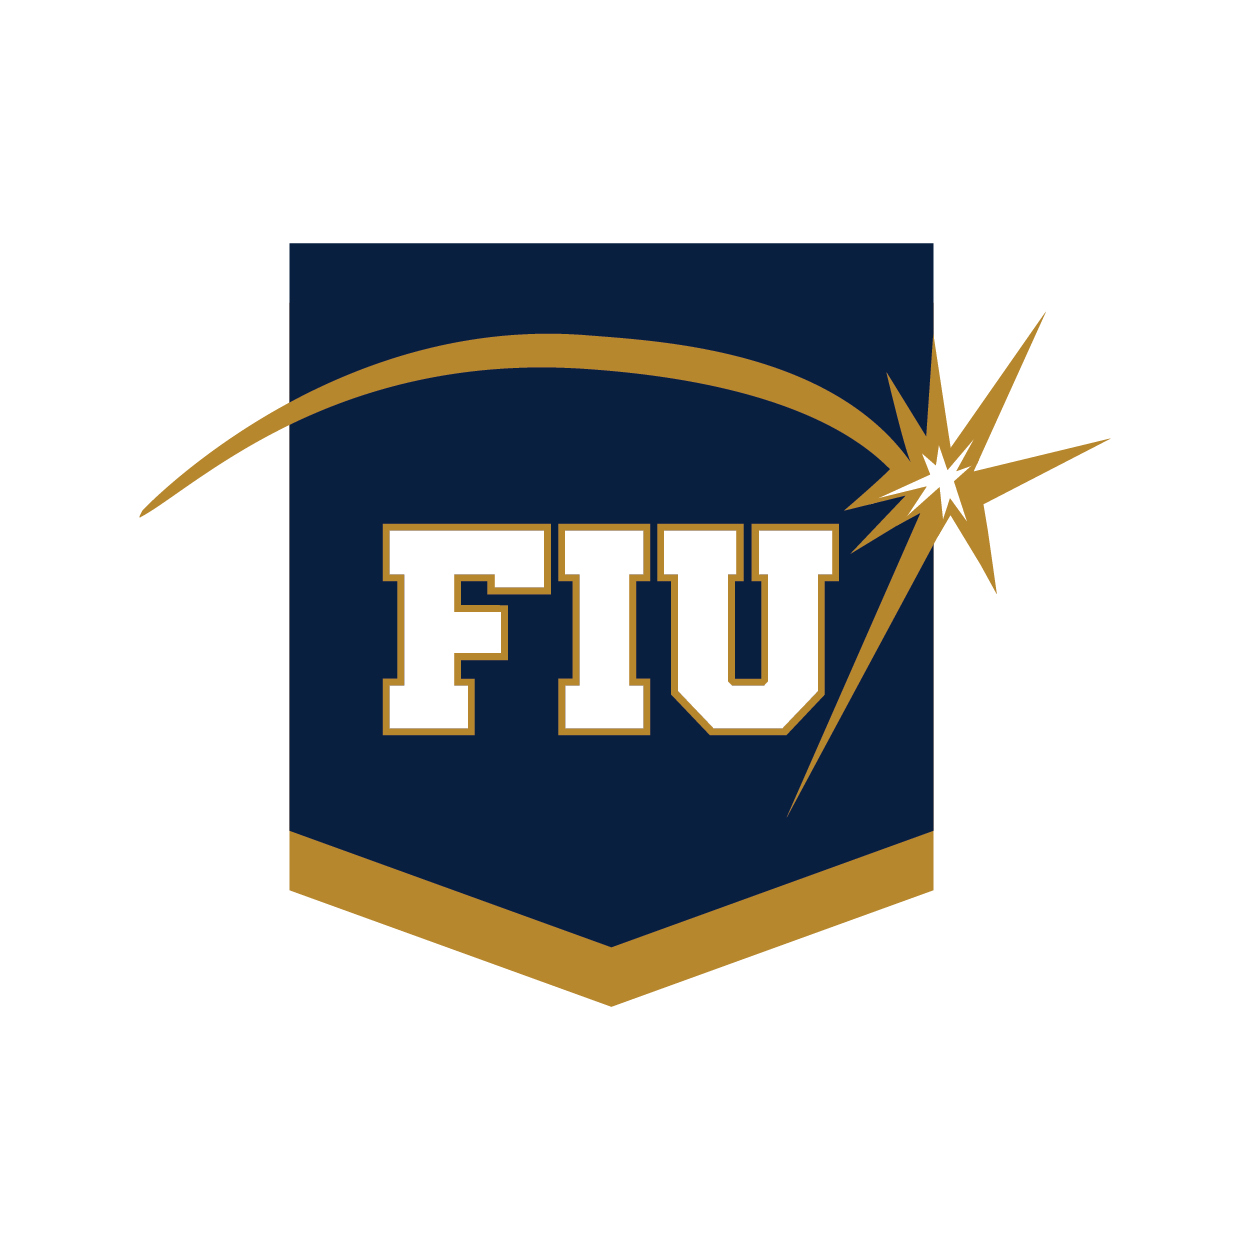 The 2018 pin is a shield shape in navy blue with FIU in the center in white and with a gold spark over it, at the bottom there is a gold outline of the shield